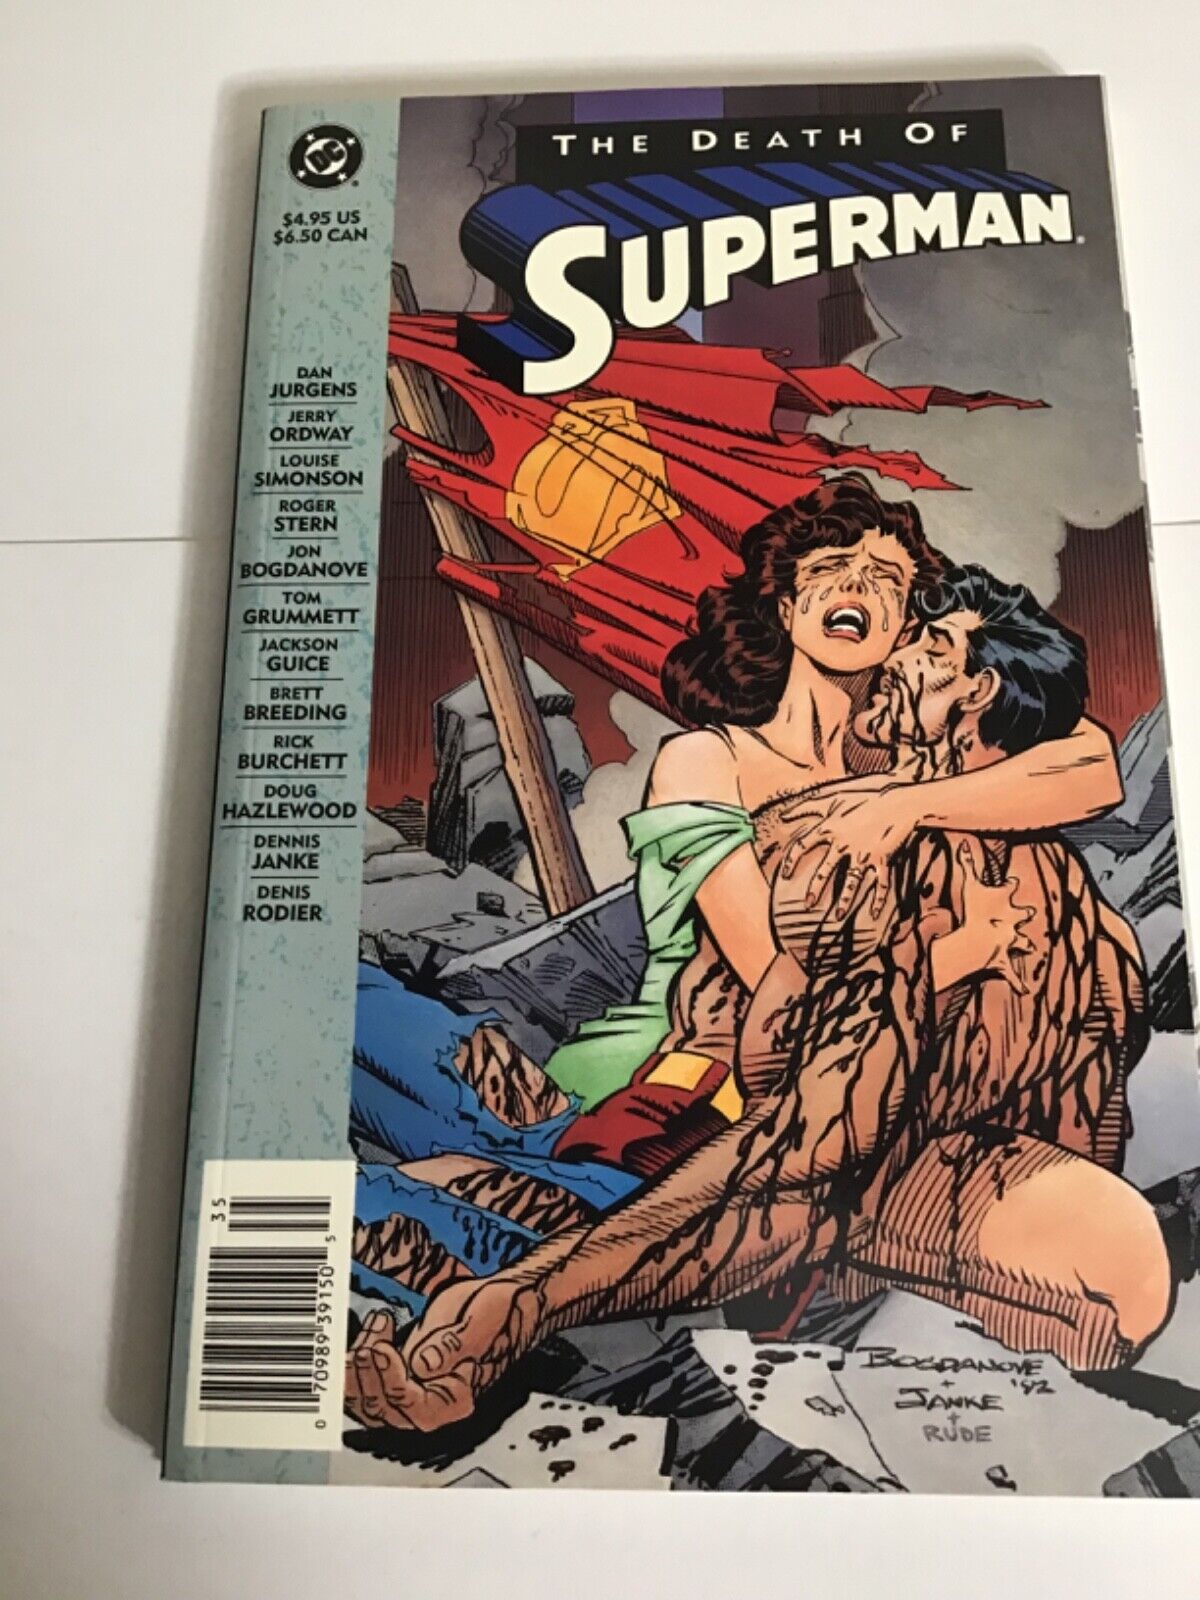 NEW - The Death of Superman Comic Book 1st Edition Print 1993